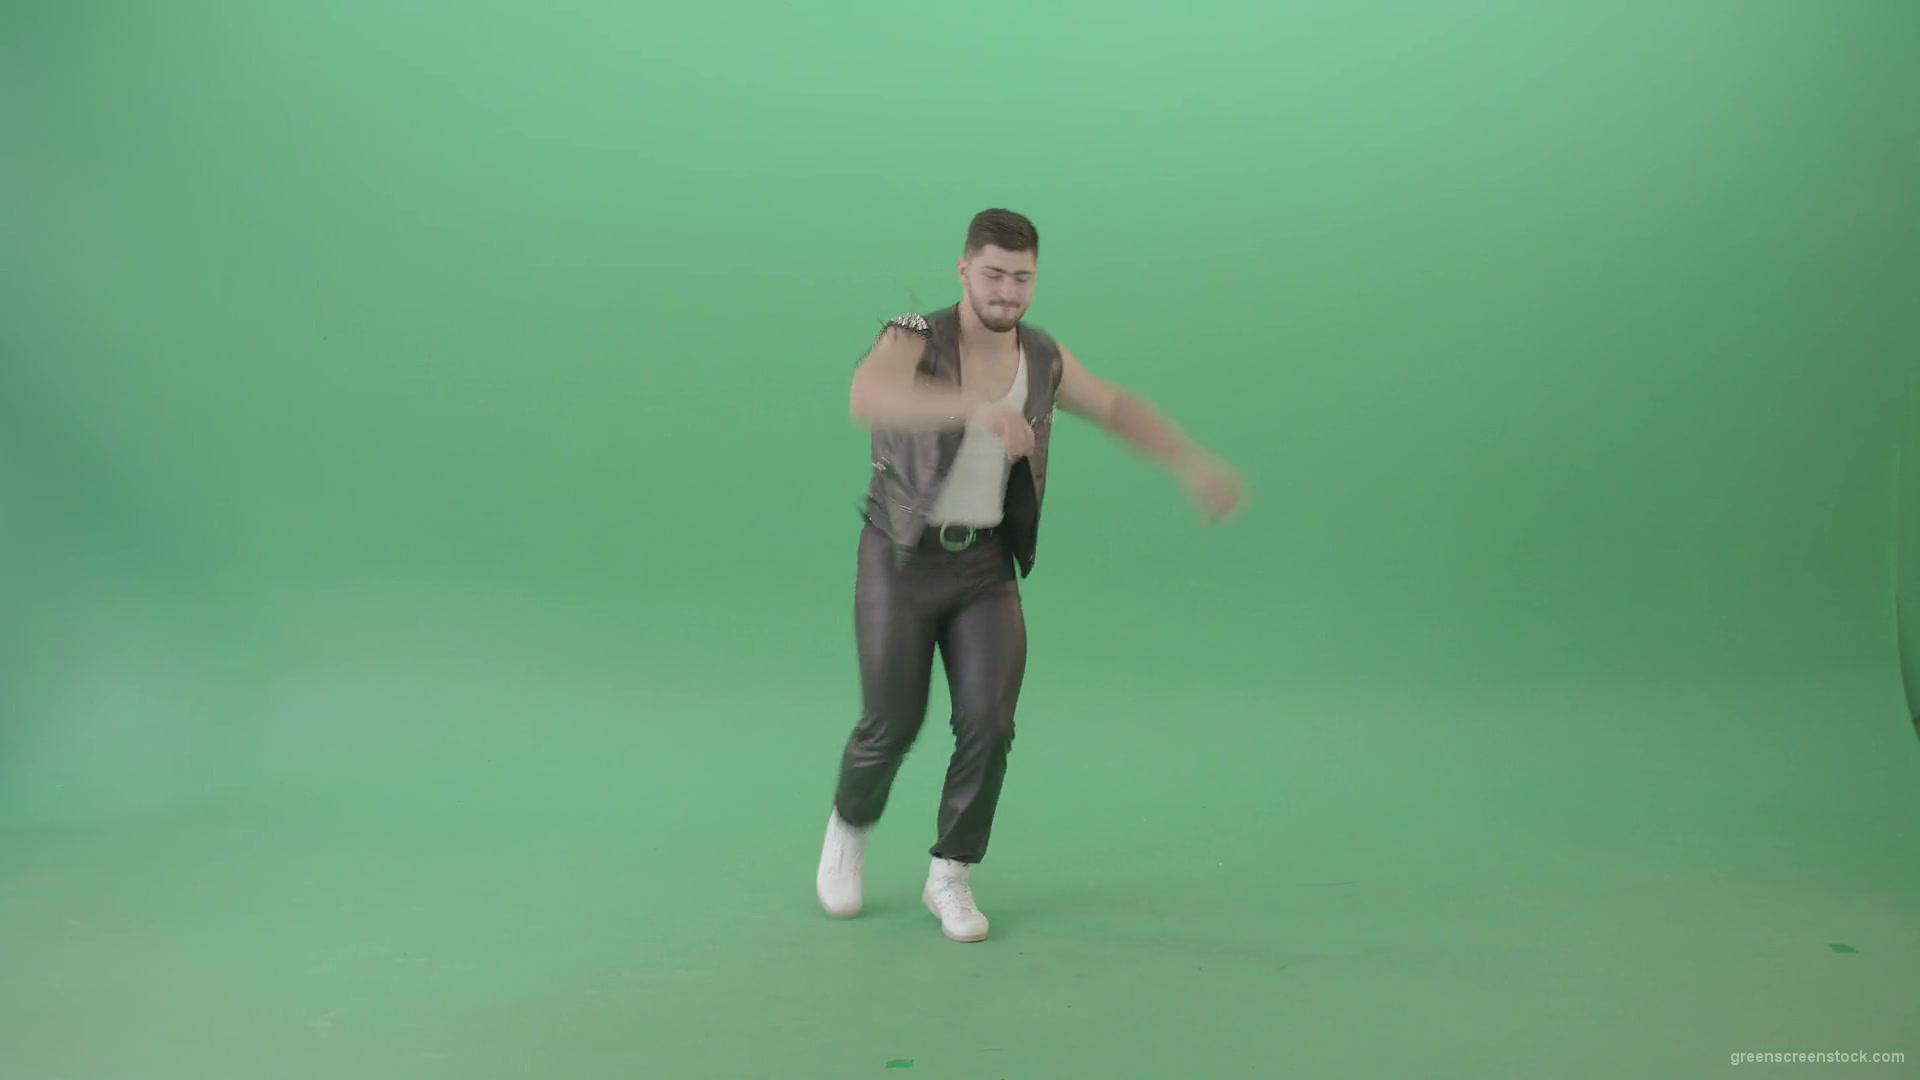 Angry-caucasian-Man-in-Black-leather-costume-dancing-Pop-Moves-on-Green-Screen-4K-Video-Footage-1920_007 Green Screen Stock